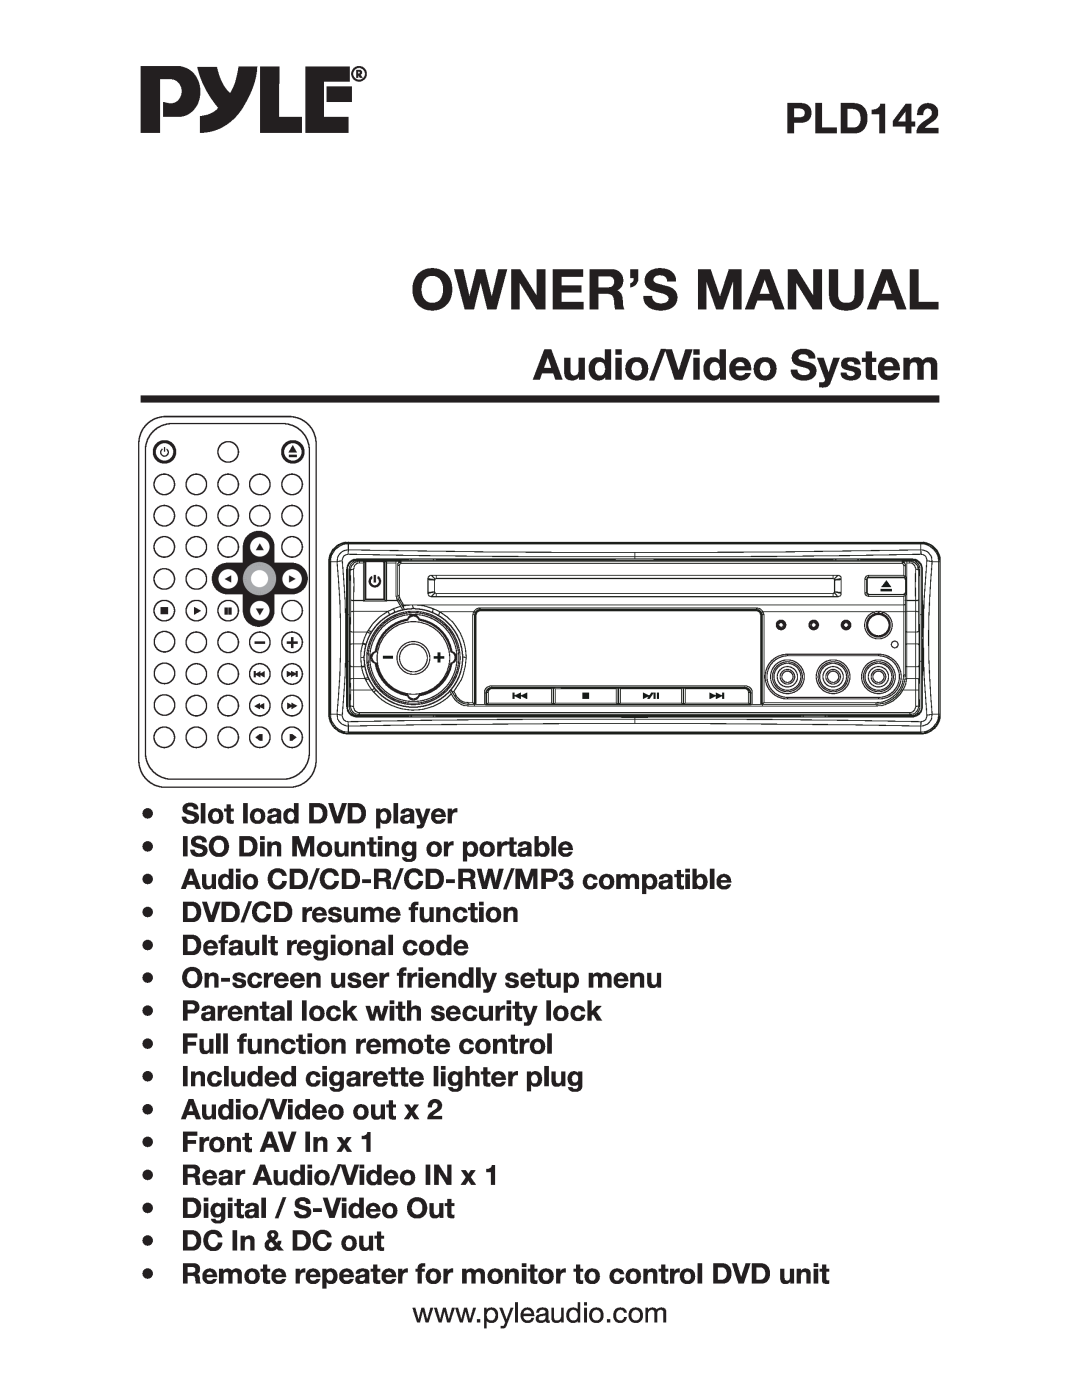 PYLE Audio PLD142 owner manual Owner’S Manual, Audio/Video System 